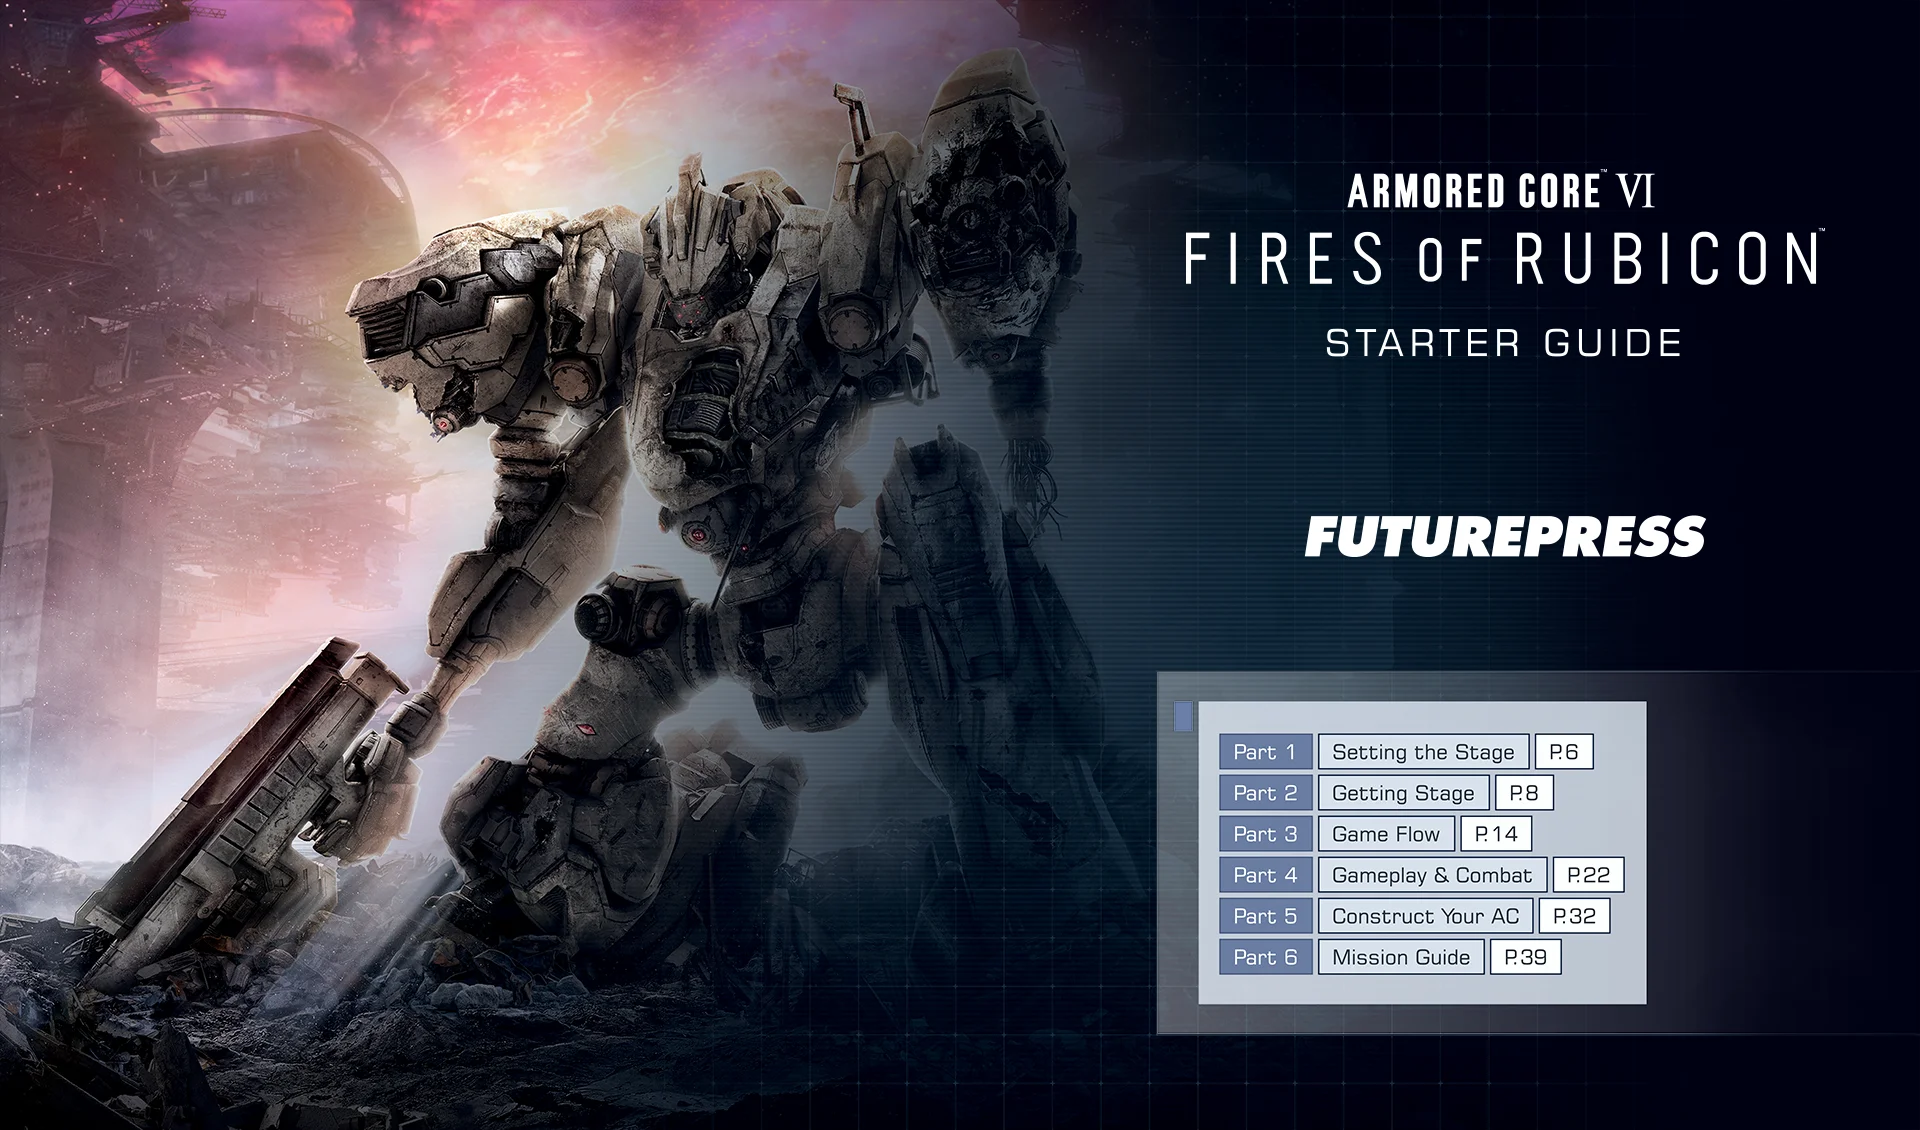 Five Things You Should Know Before Playing Armored Core VI Fires